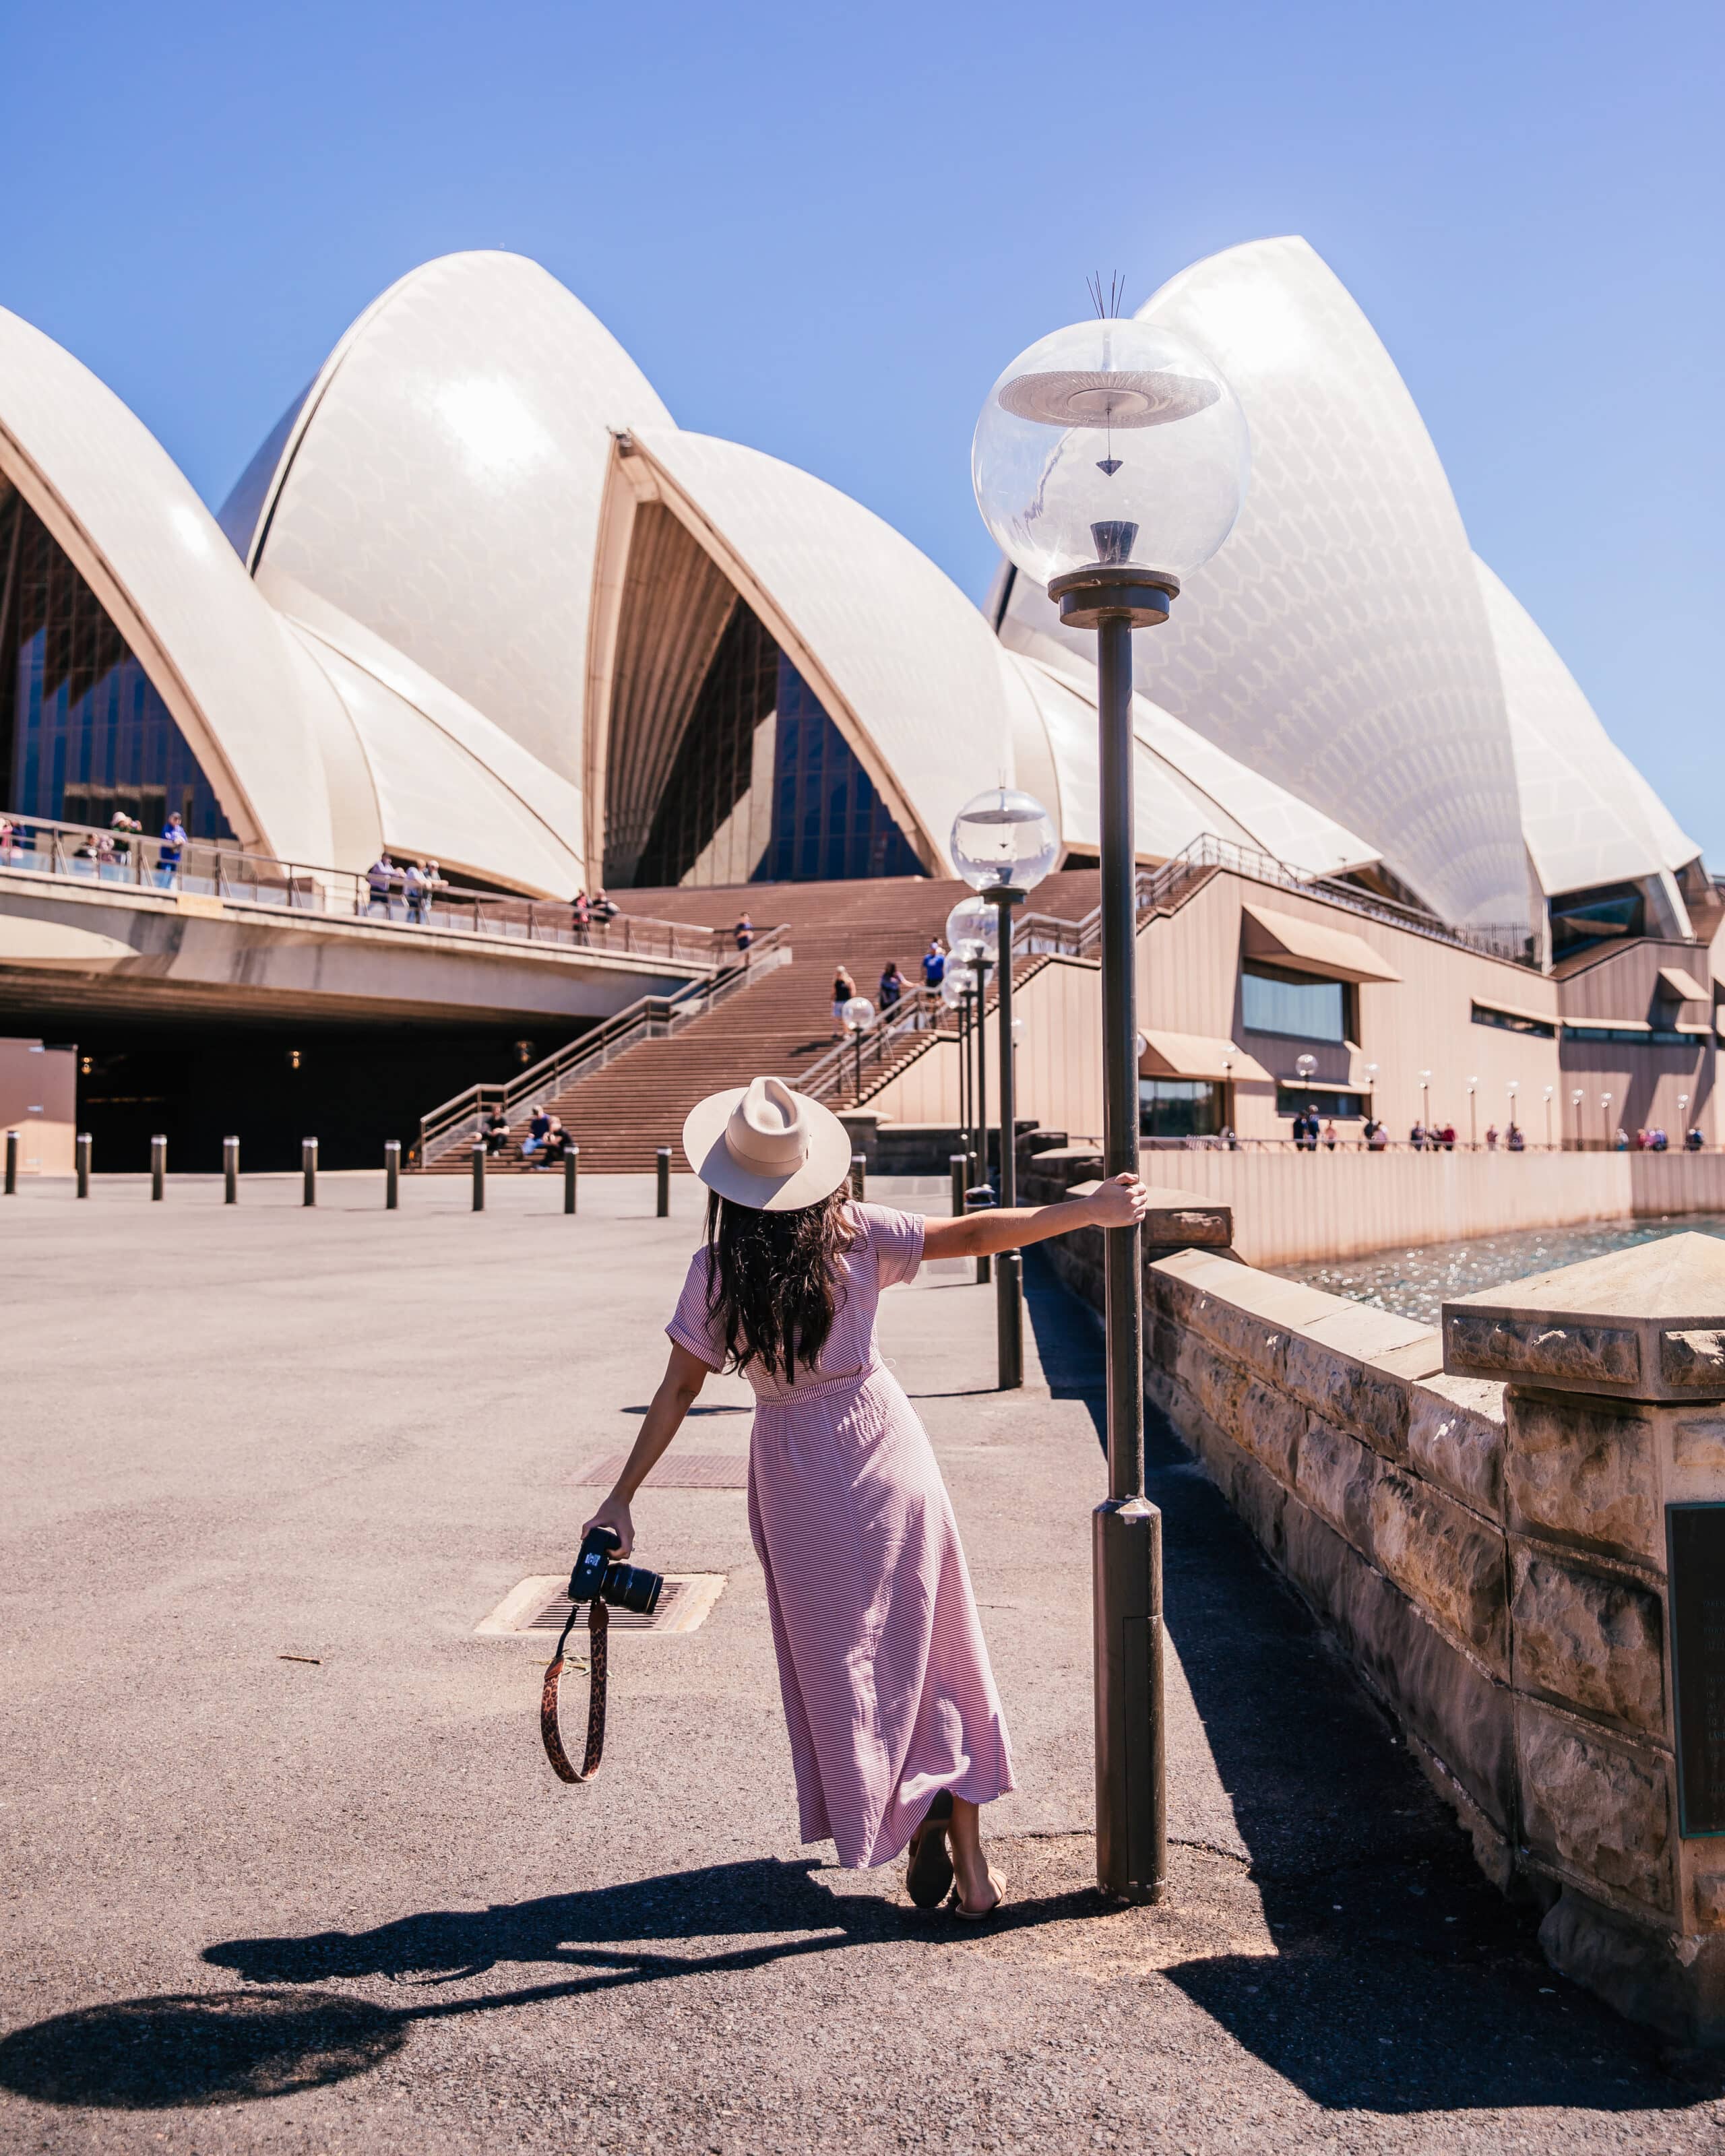 10 Most Instagrammable Places in Sydney - Where to Take Stunning